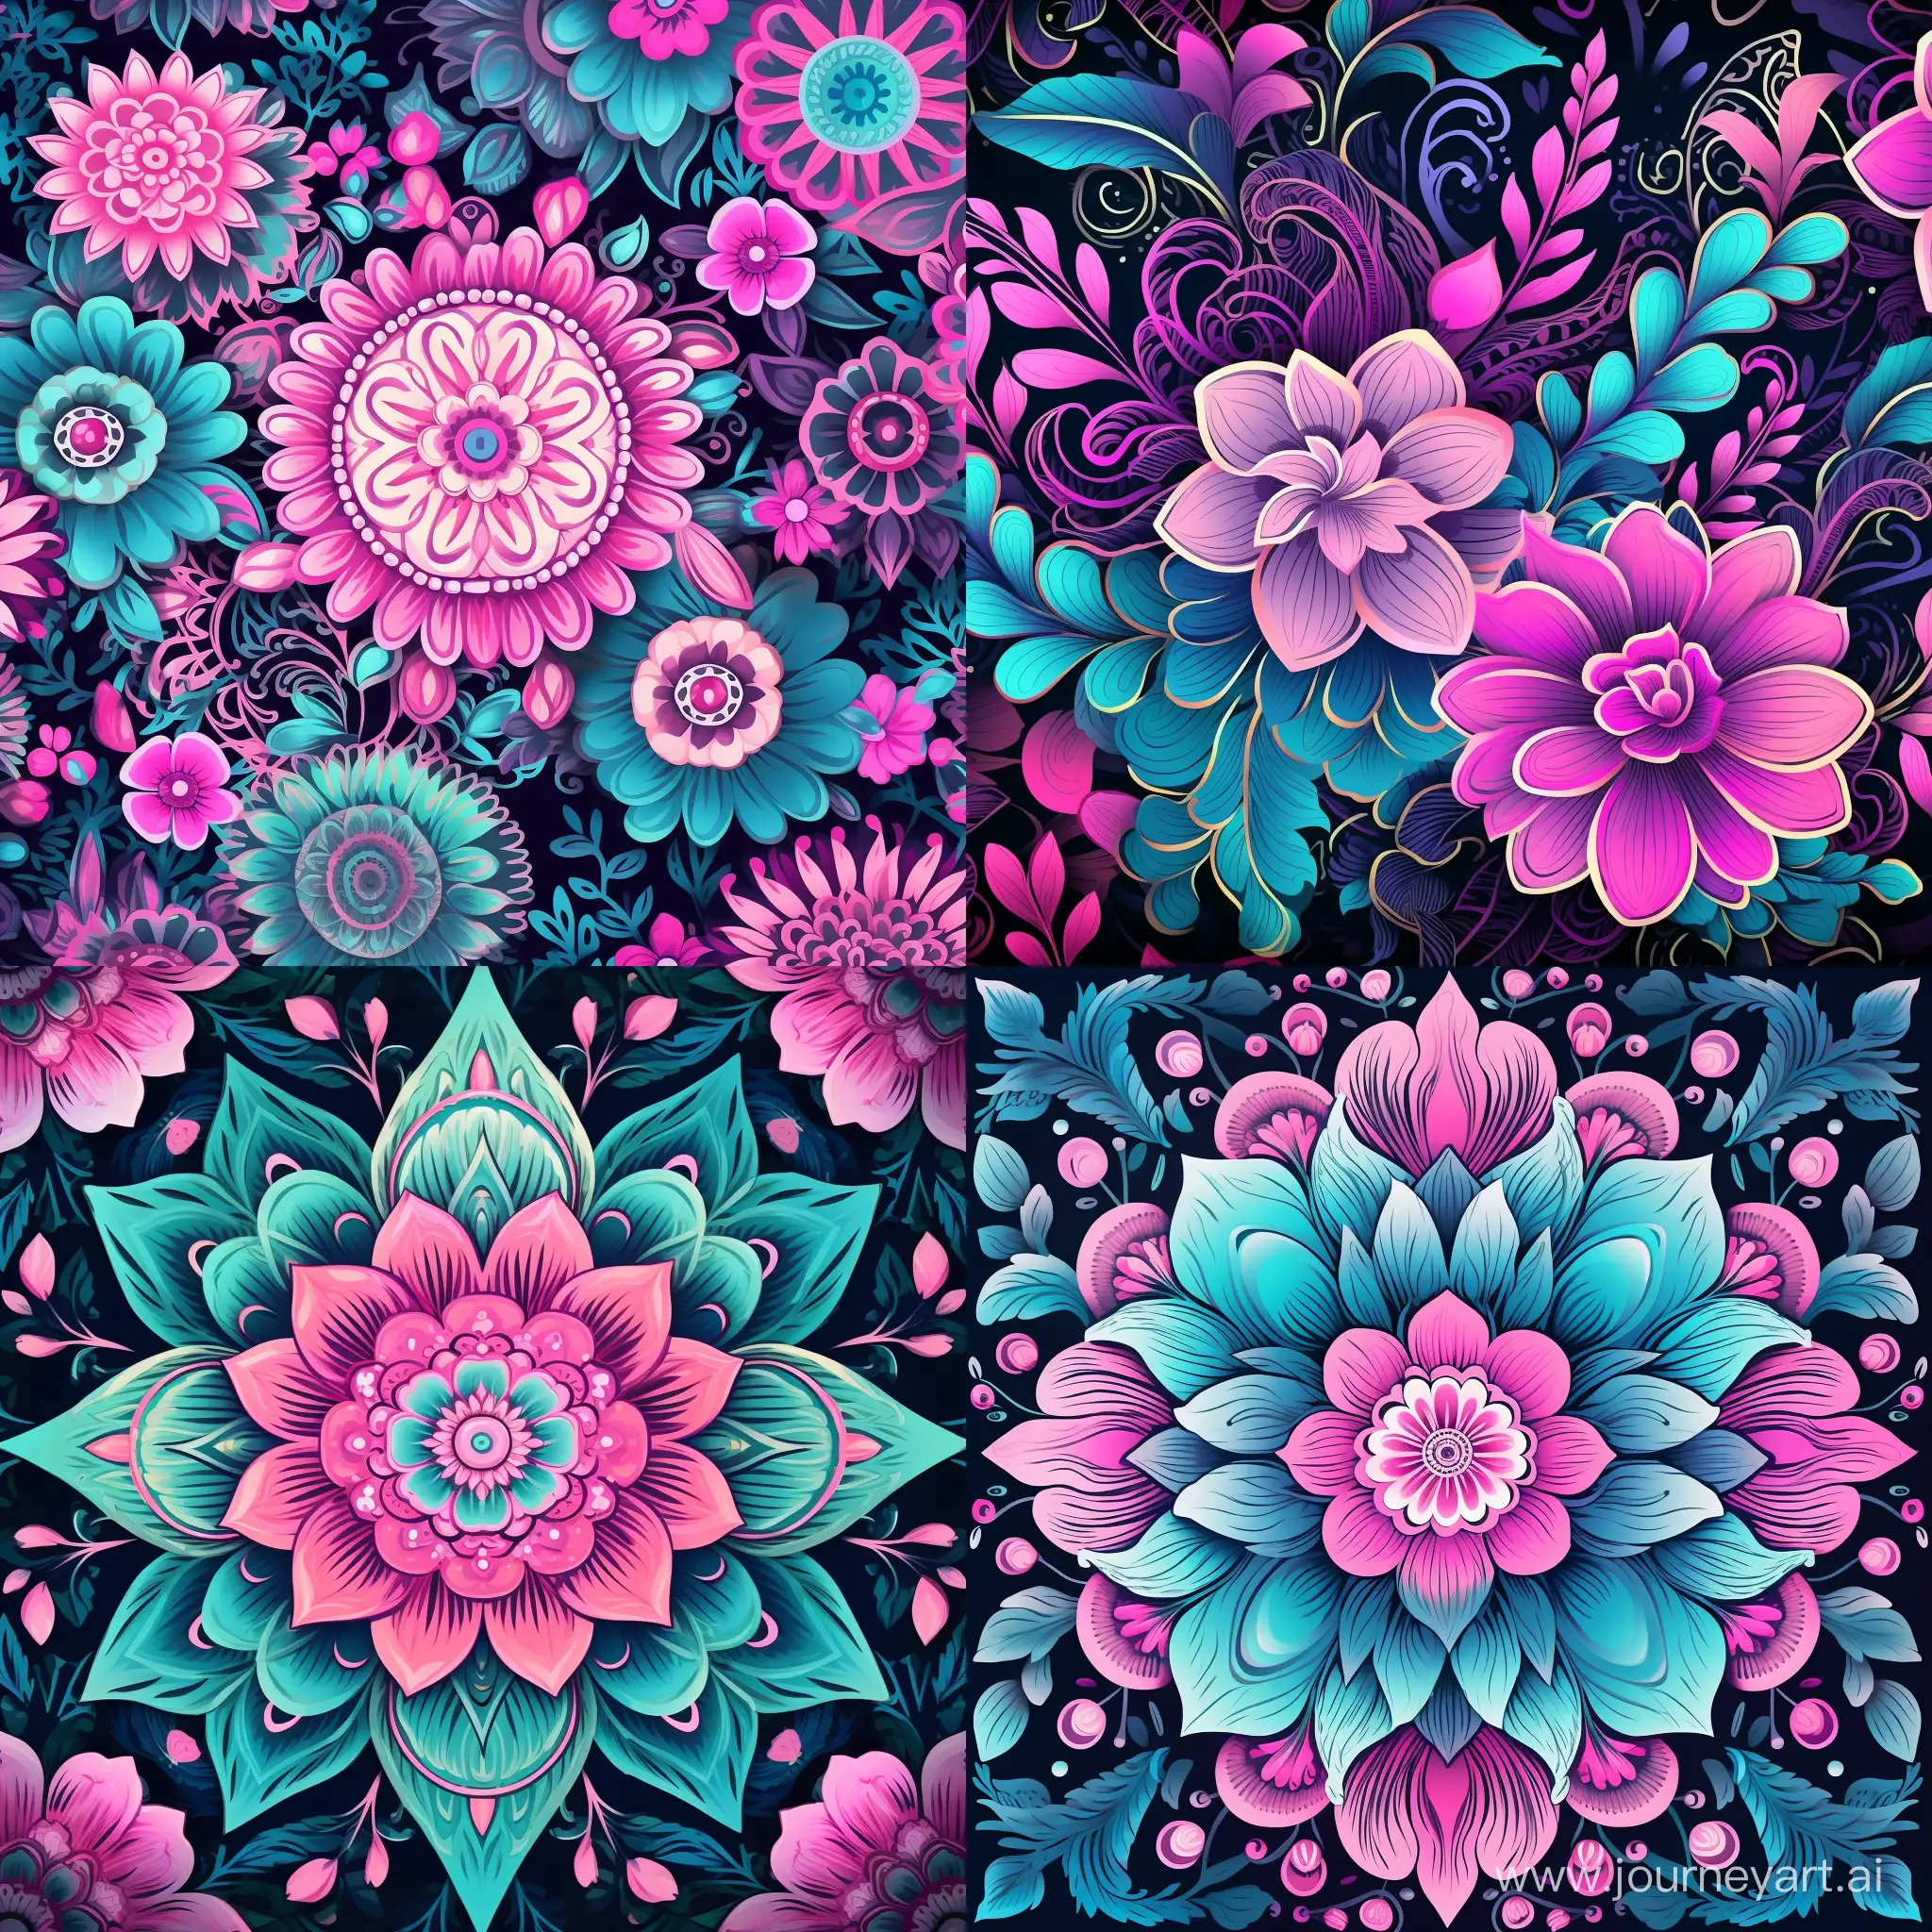 Floral-Mandala-Computer-Background-in-Turquoise-and-Pink-Hues